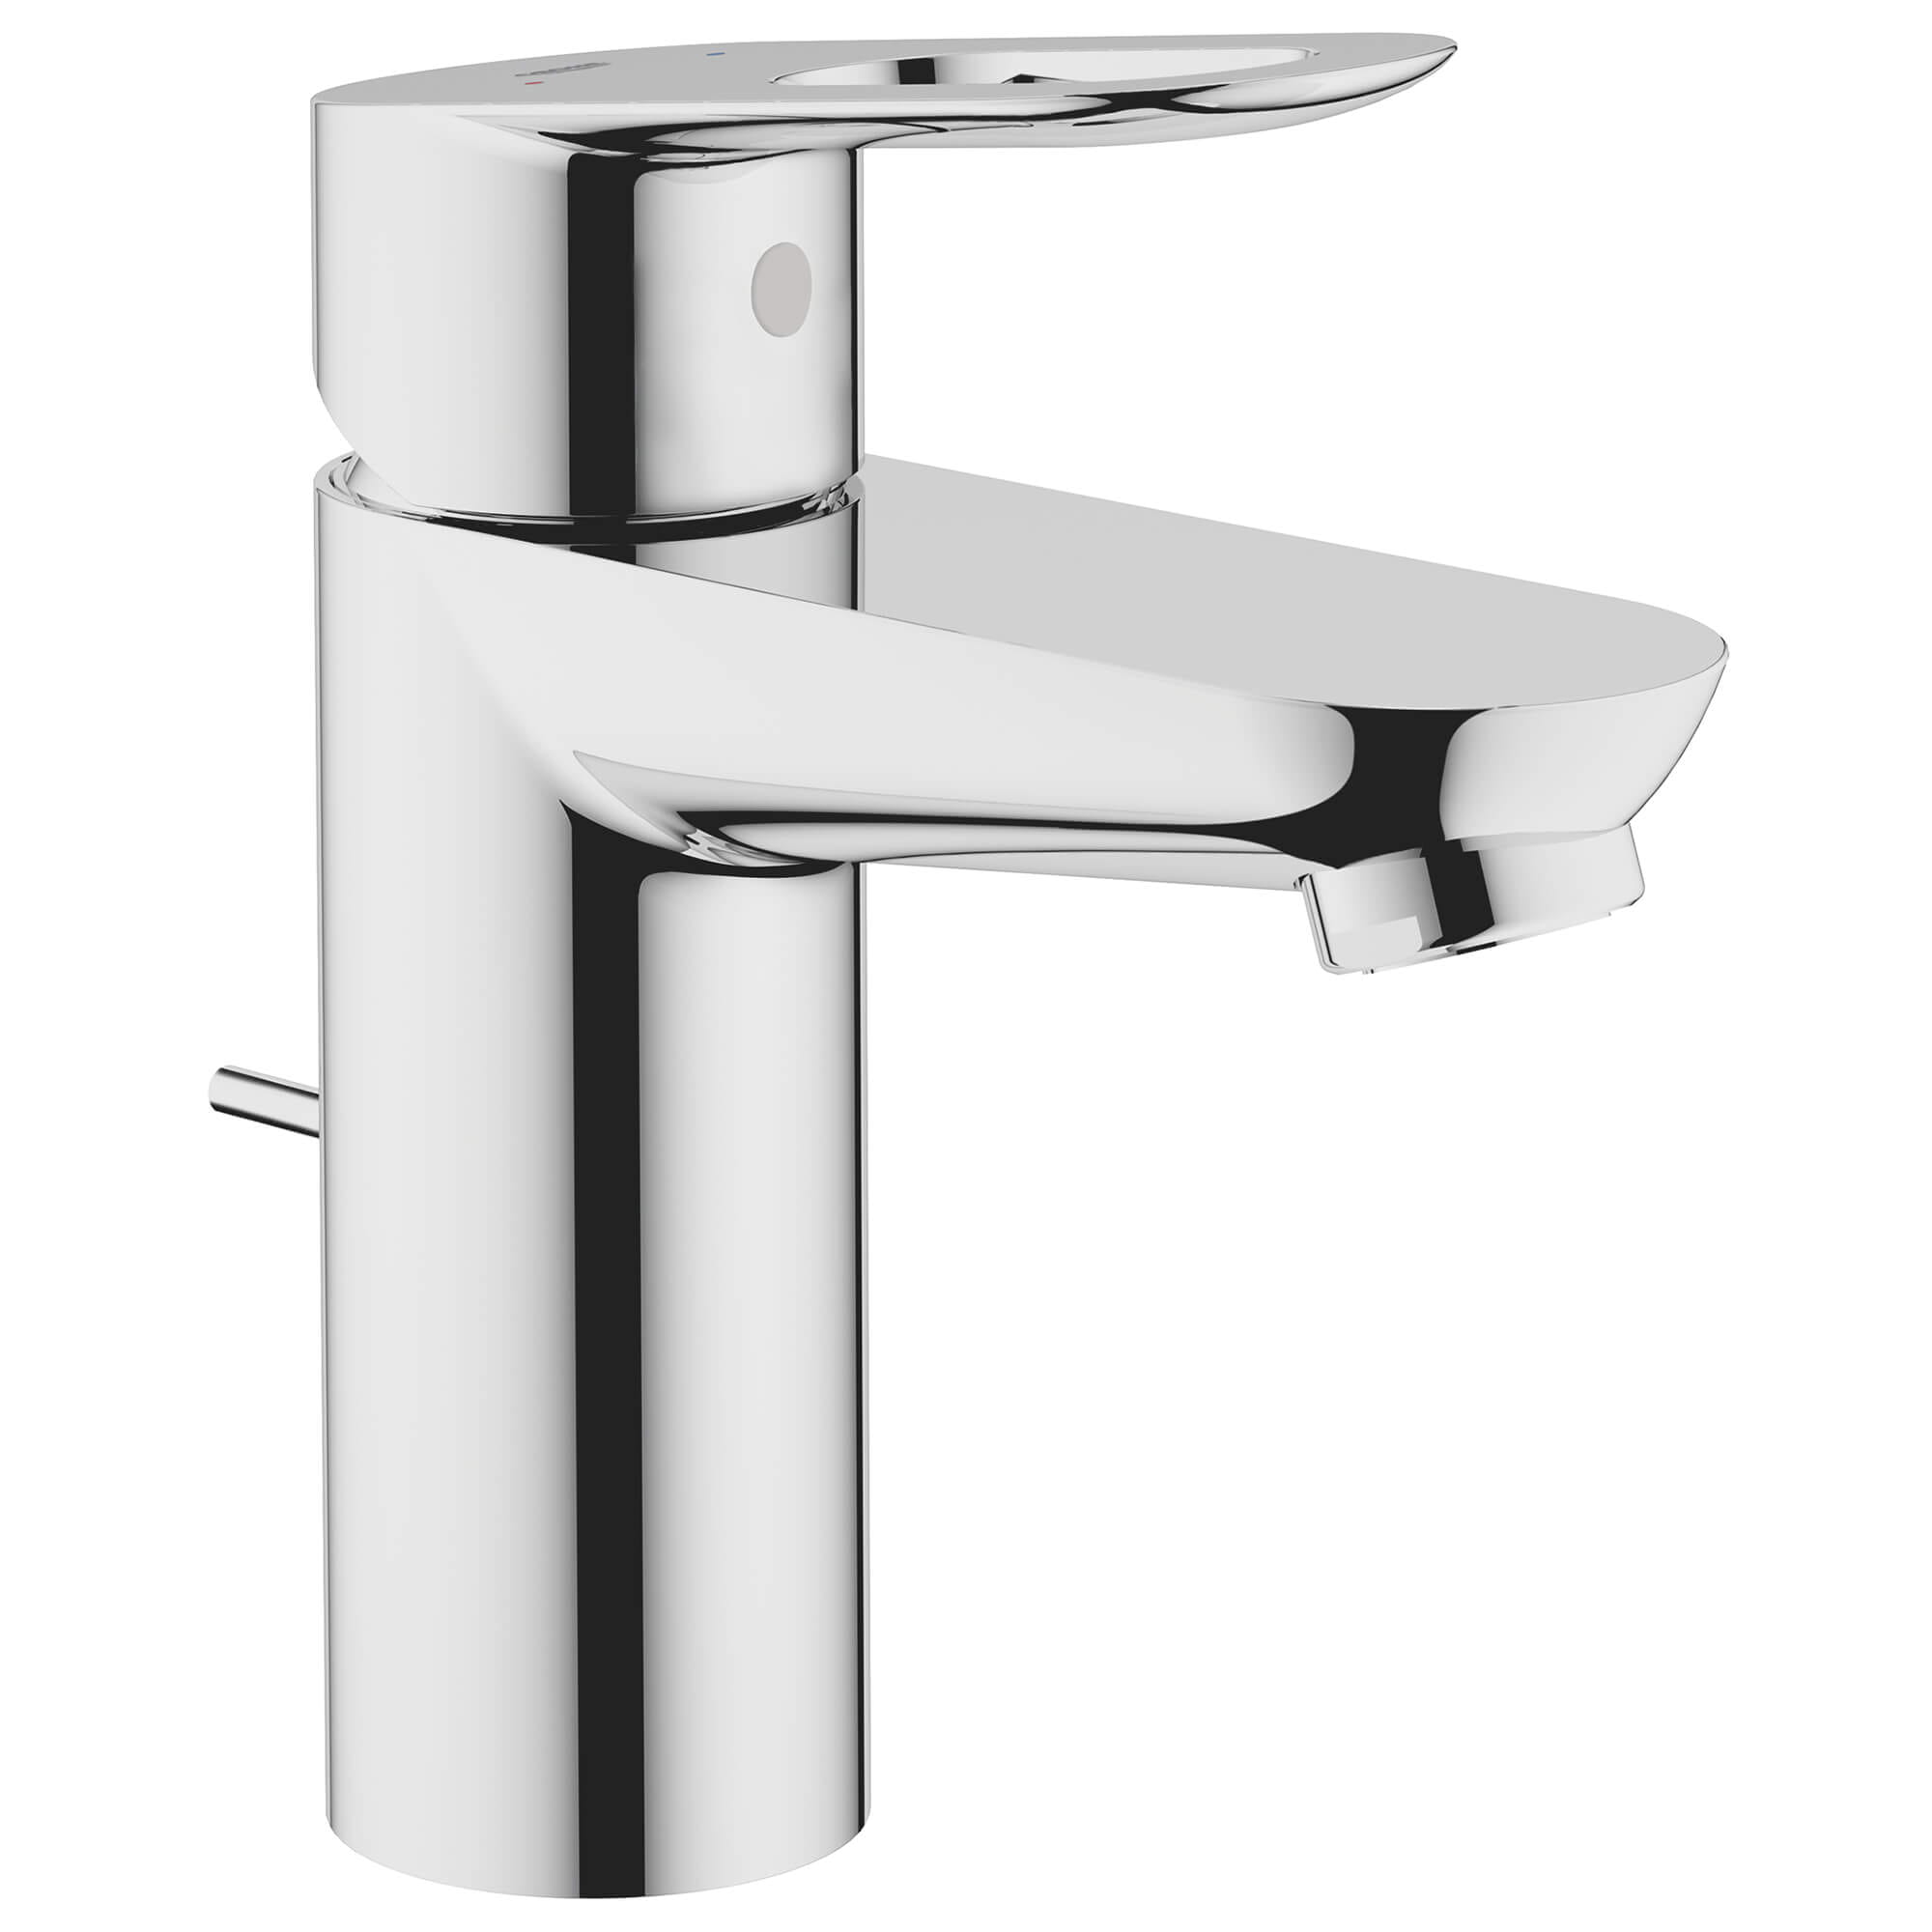 SINGLE HOLE SINGLE-HANDLE S-SIZE BATHROOM FAUCET 1.5 GPM-related